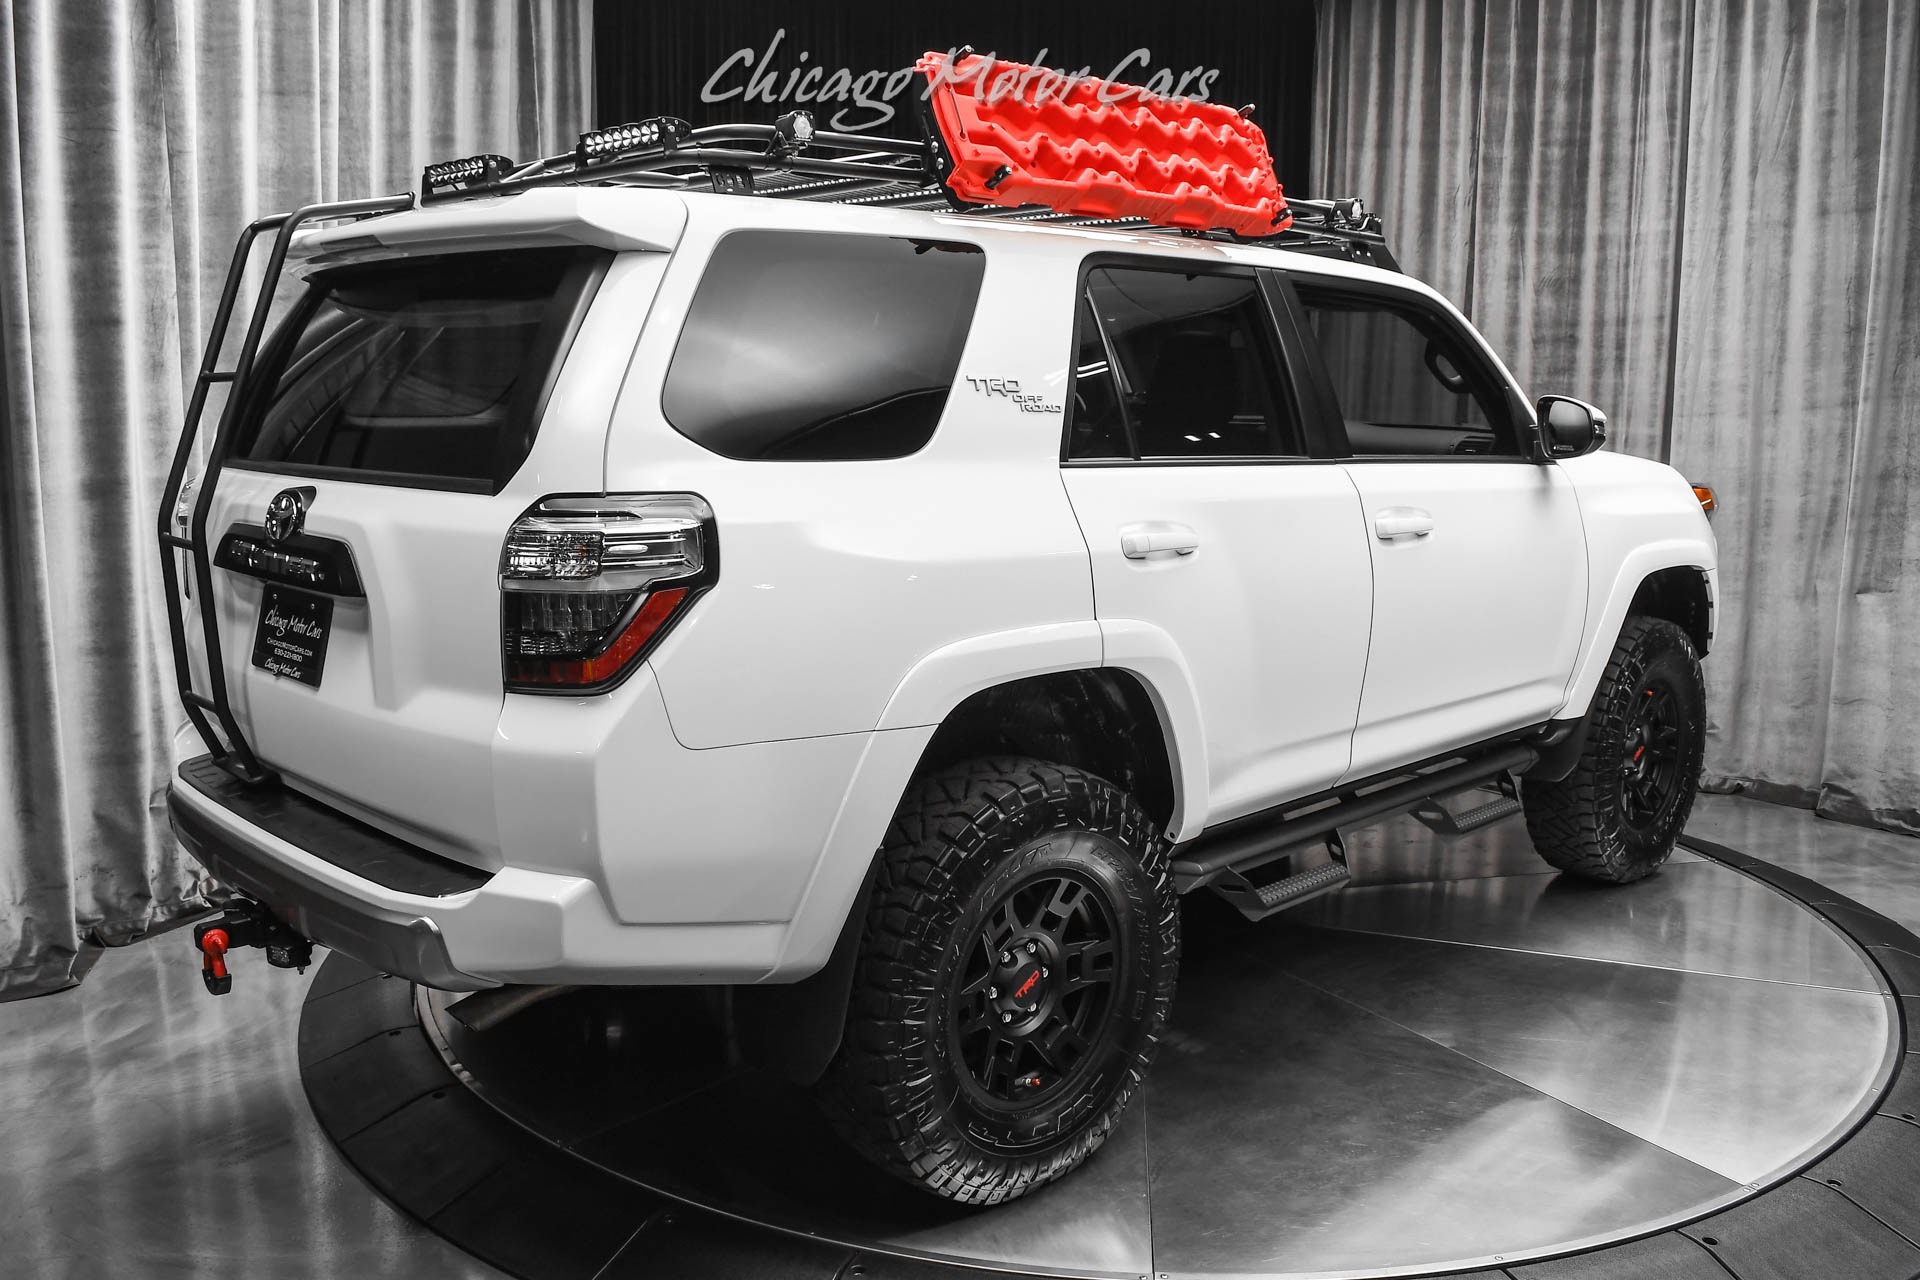 Used-2019-Toyota-4Runner-TRD-SUPERCHARGED-ICON-STAGE-5-LIFT-OVER-30K-IN-UPGRADES